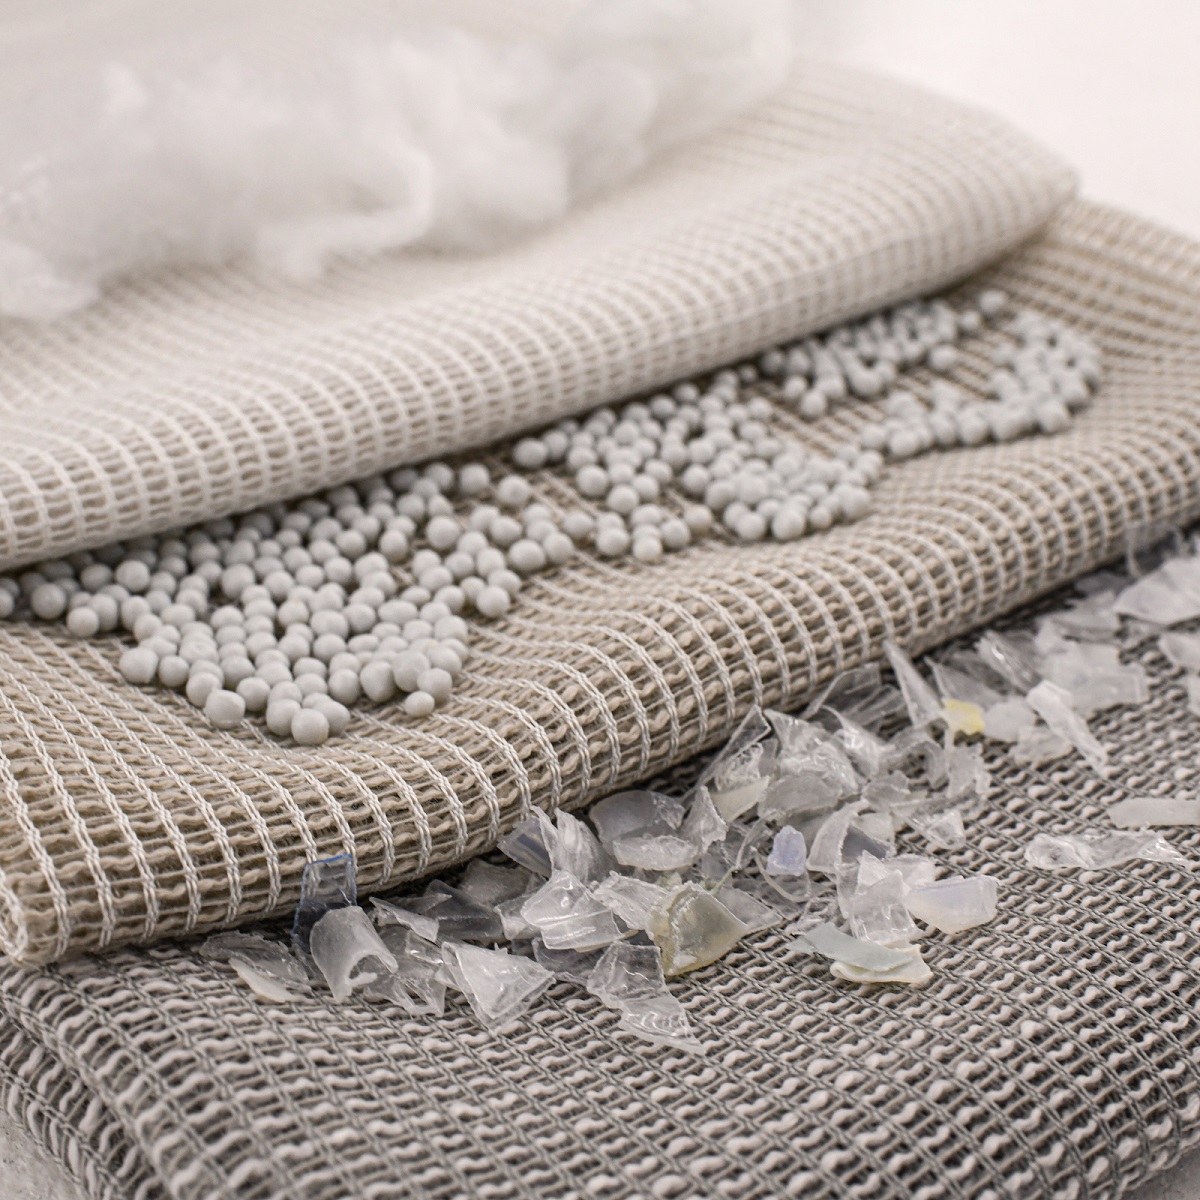 recycled fabric with plastic waste samples that are used in the yarn production